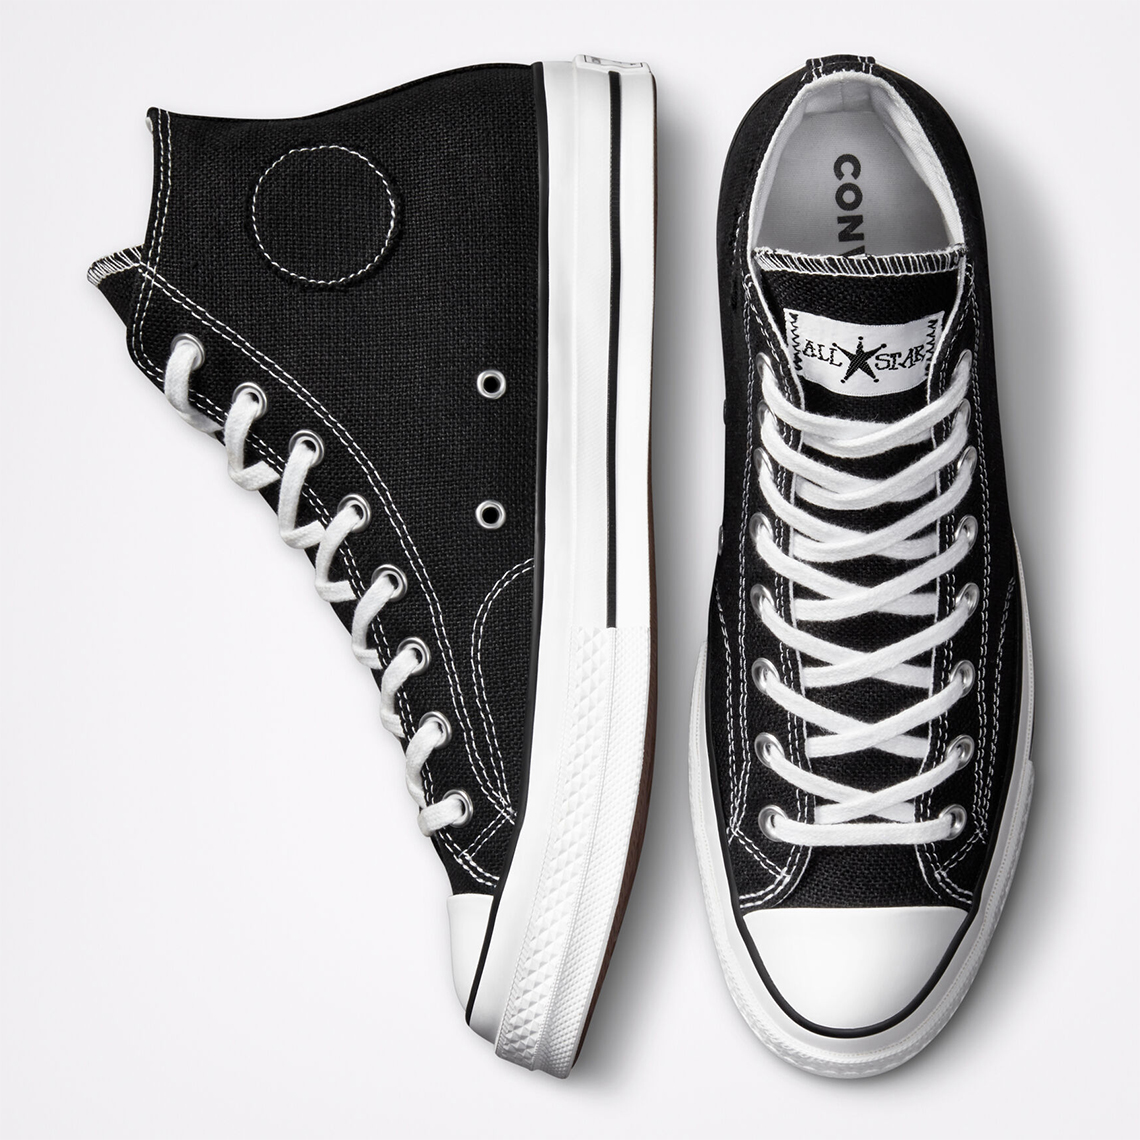 Stussy Converse Chuck 70 + One Star Release Date | SneakerNews.com